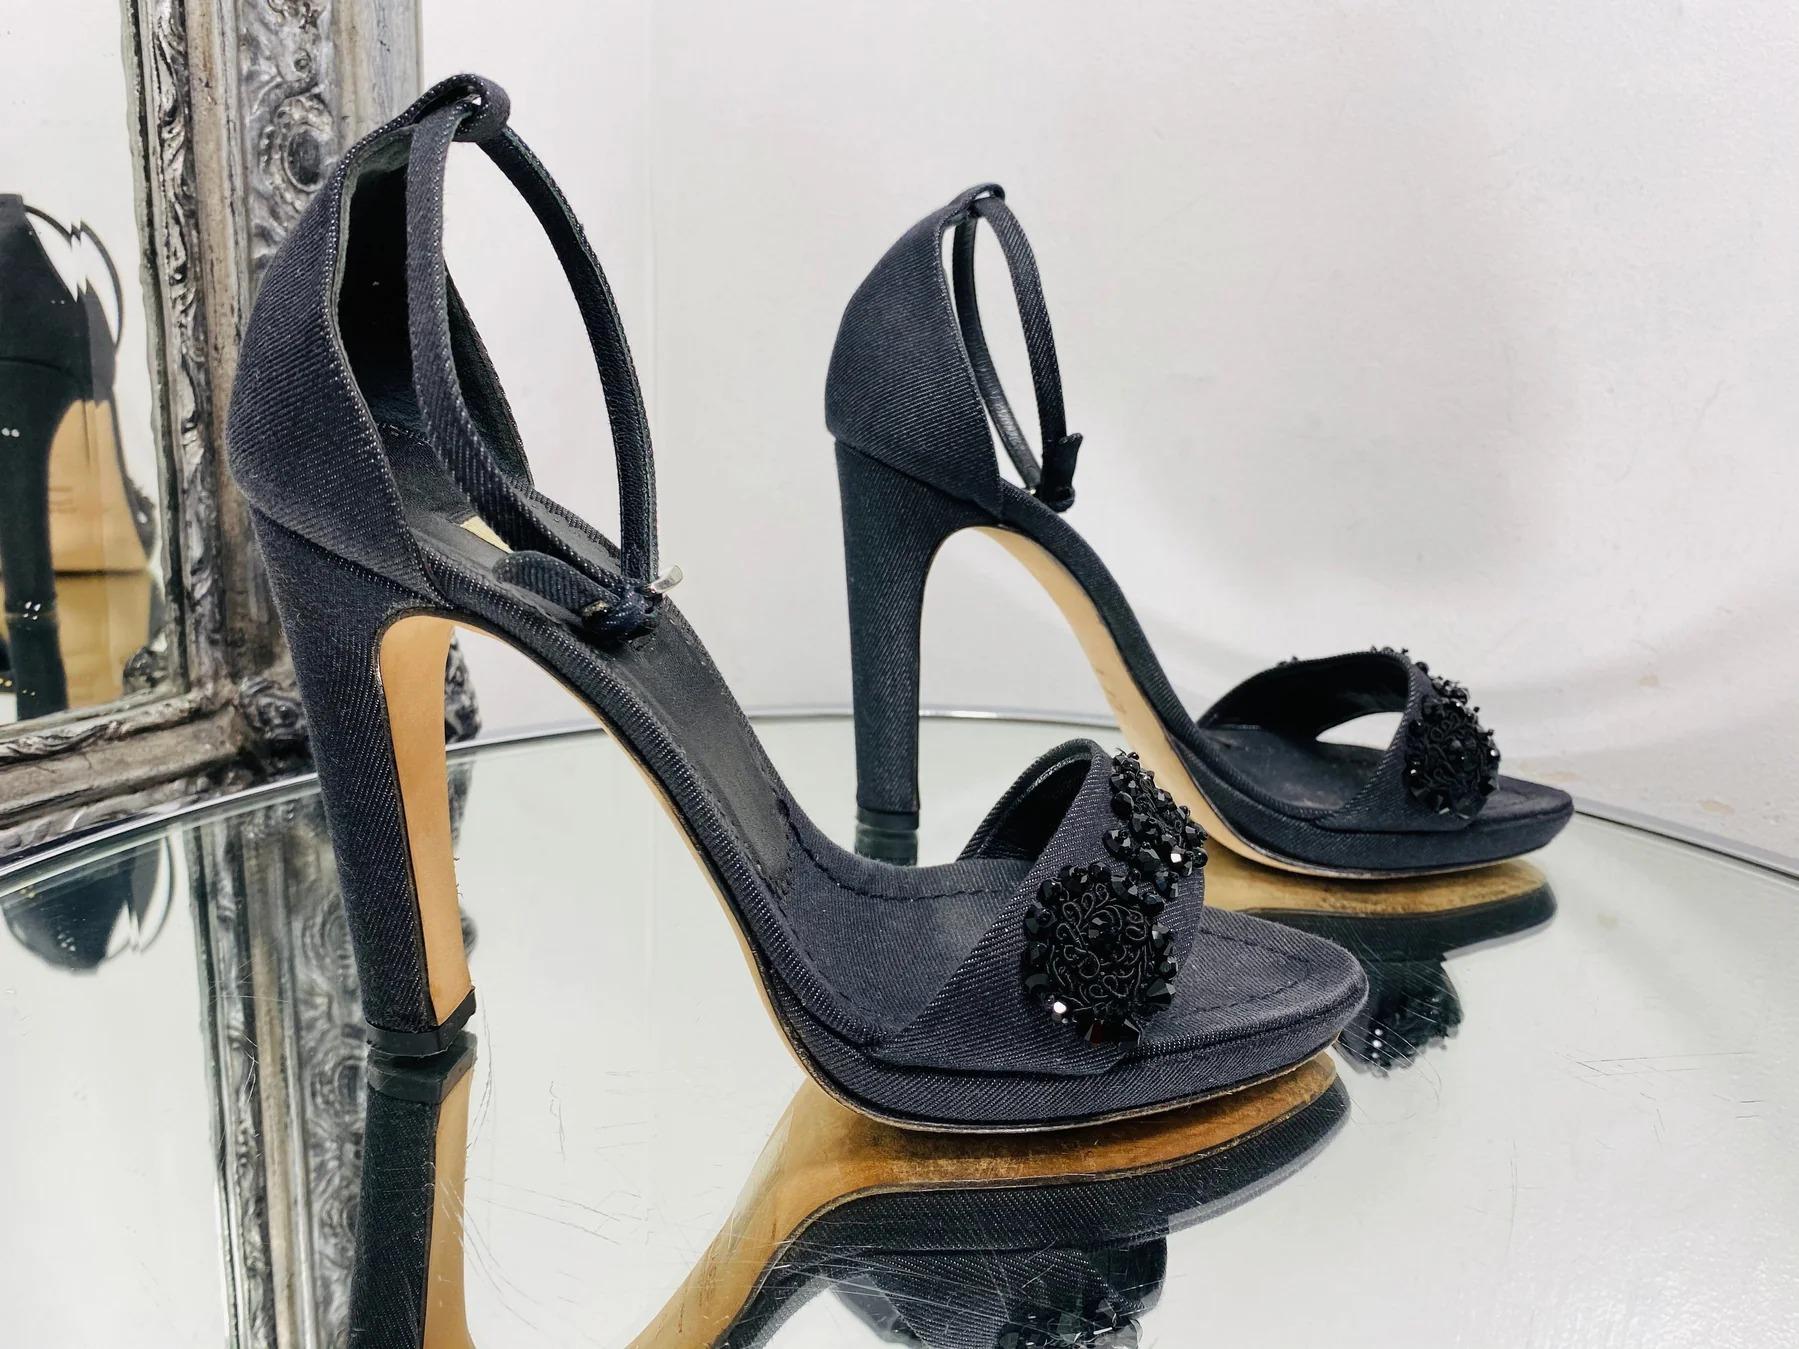 Prada Calzature Donna Heels In Excellent Condition For Sale In London, GB